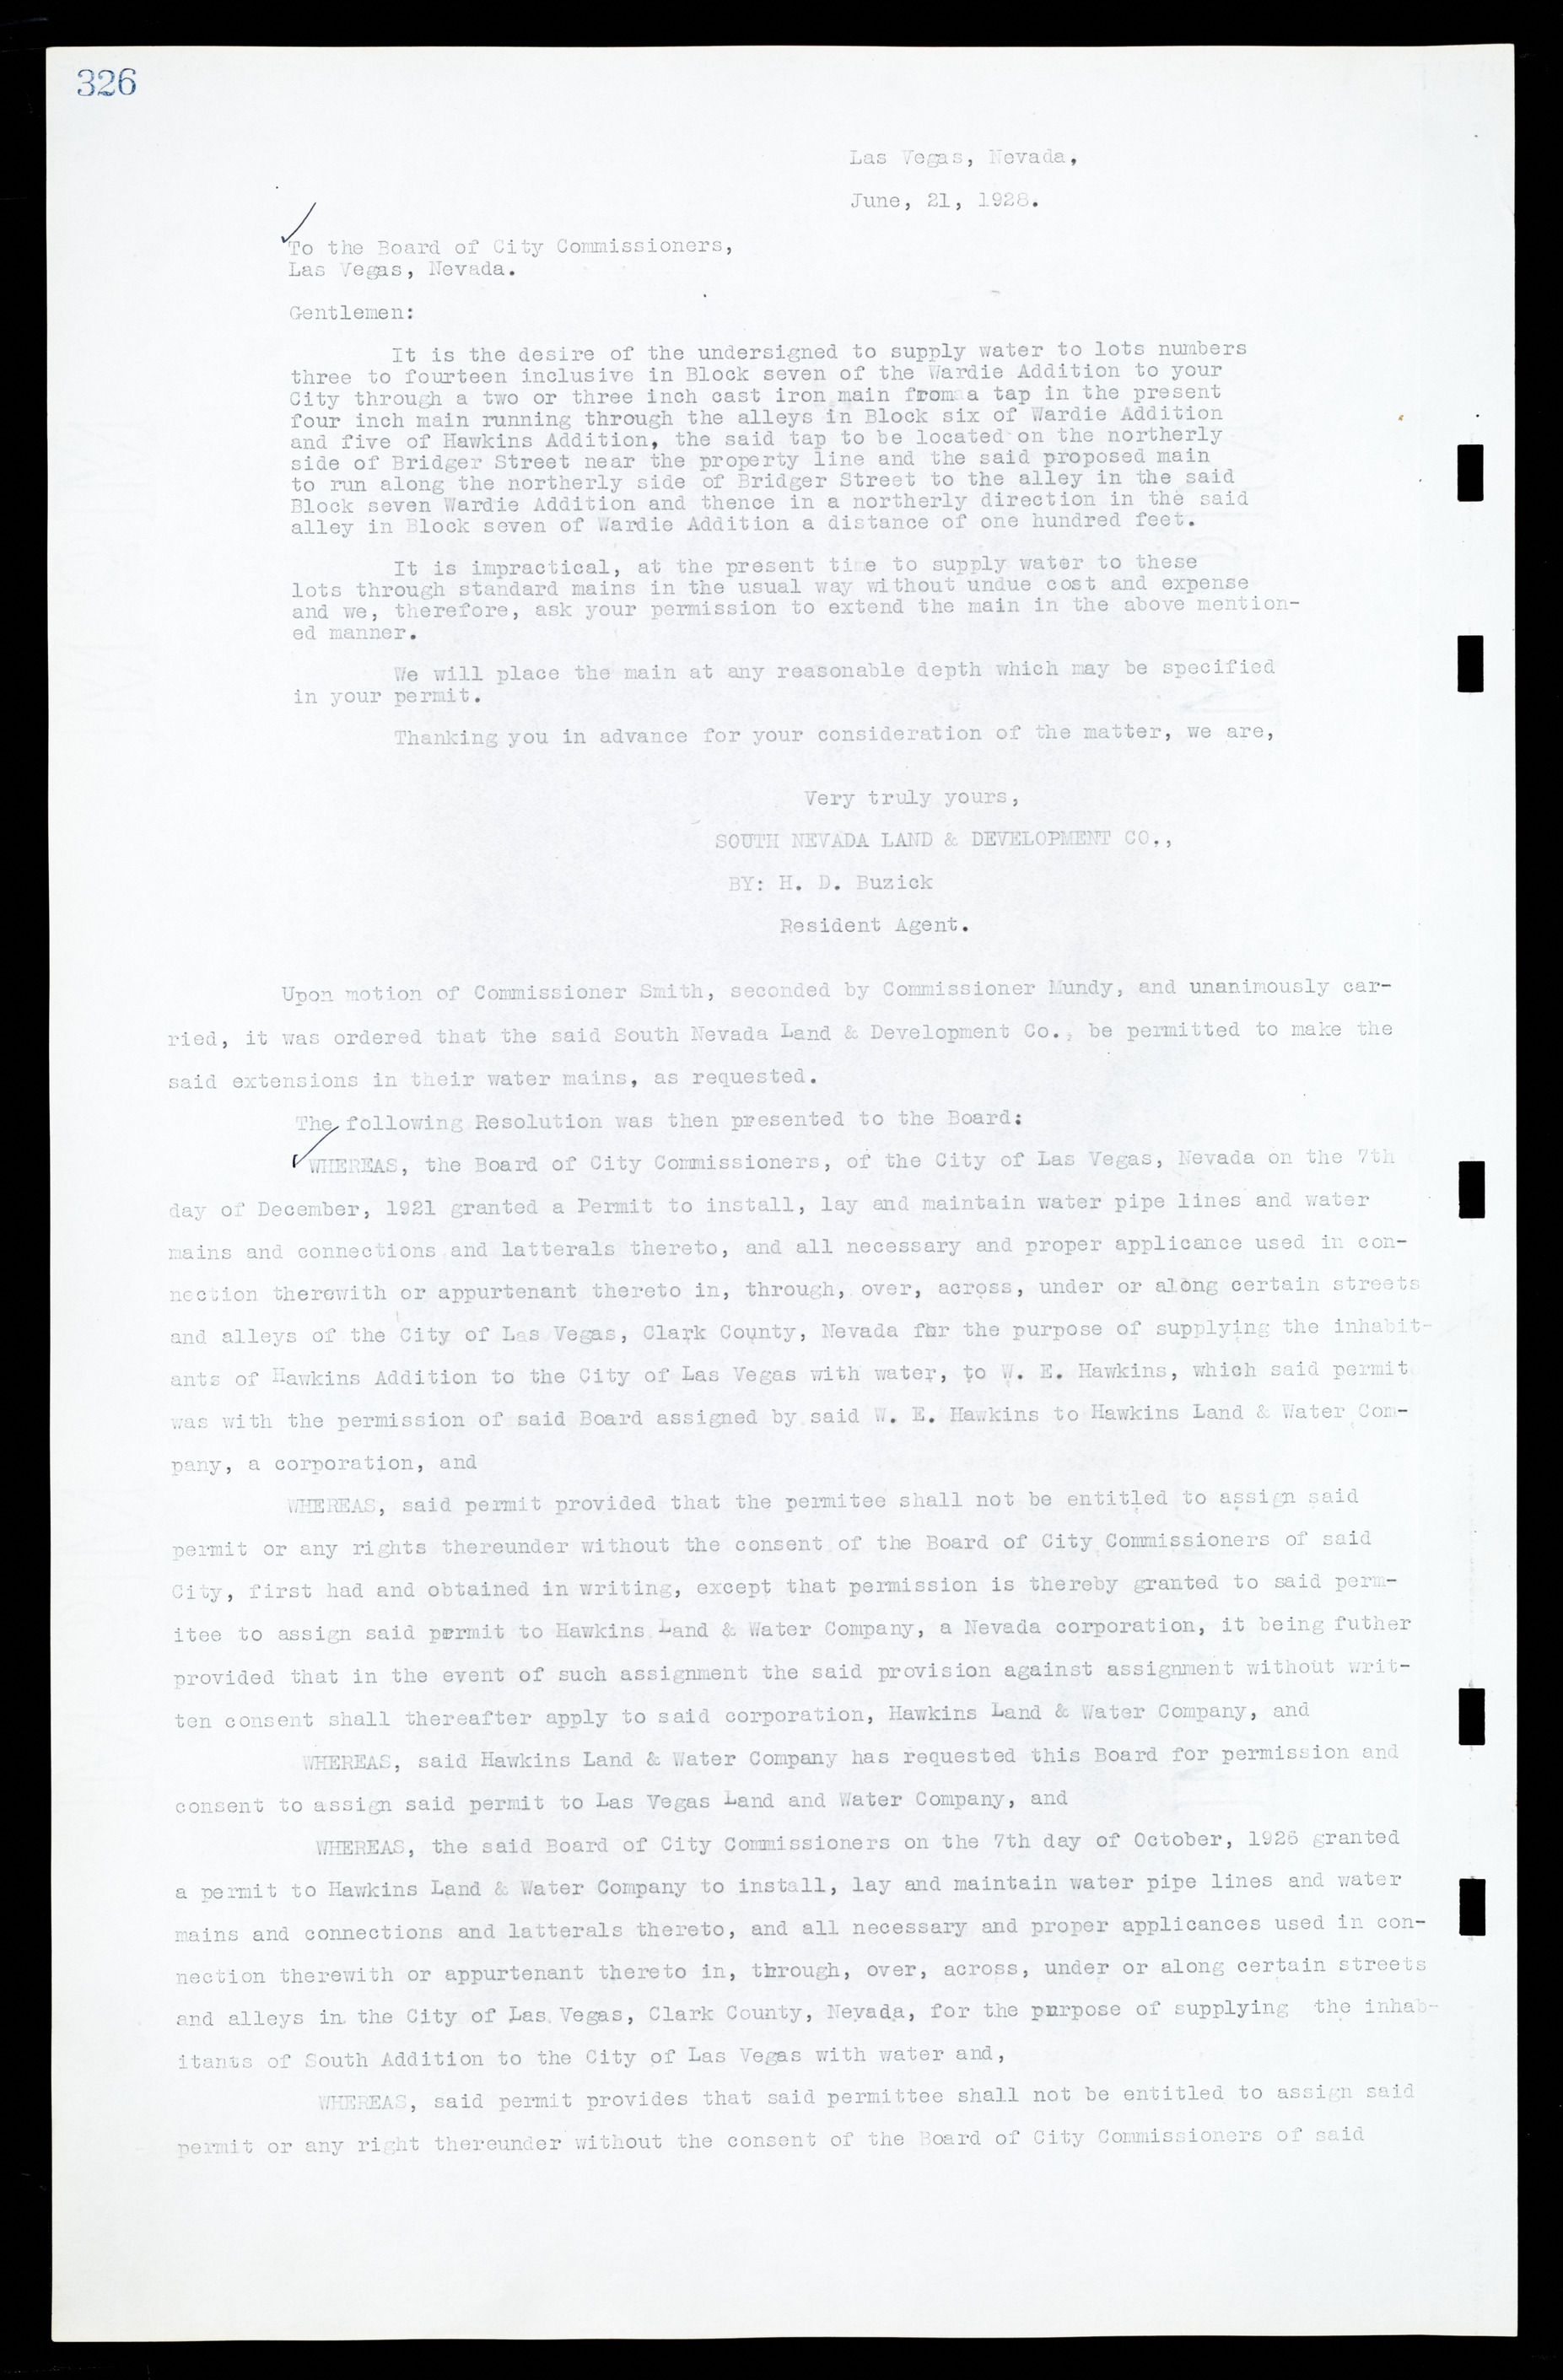 Las Vegas City Commission Minutes, March 1, 1922 to May 10, 1929, lvc000002-335